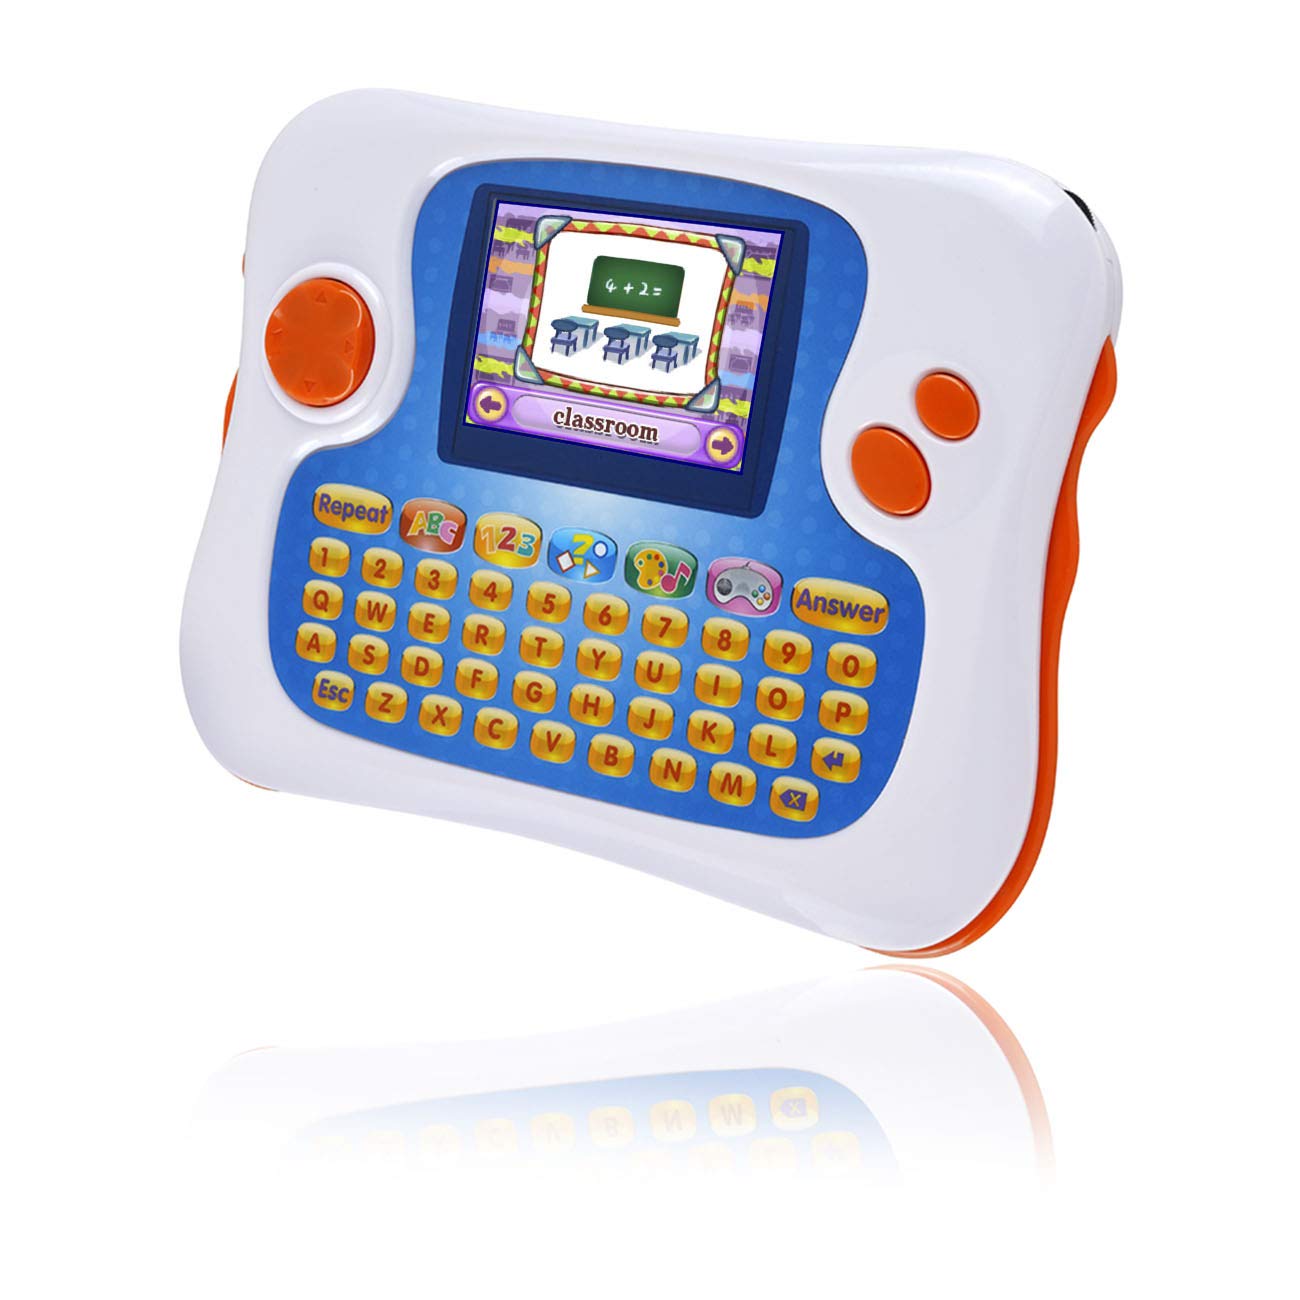 Kids Tablet,English-Spanish Bilingual Learning Tablet for Kids, Educational Toy with 104 Learning Apps/Games,Support TV Out Function,Great Choice for Preschool Toddlers Babies Early Education